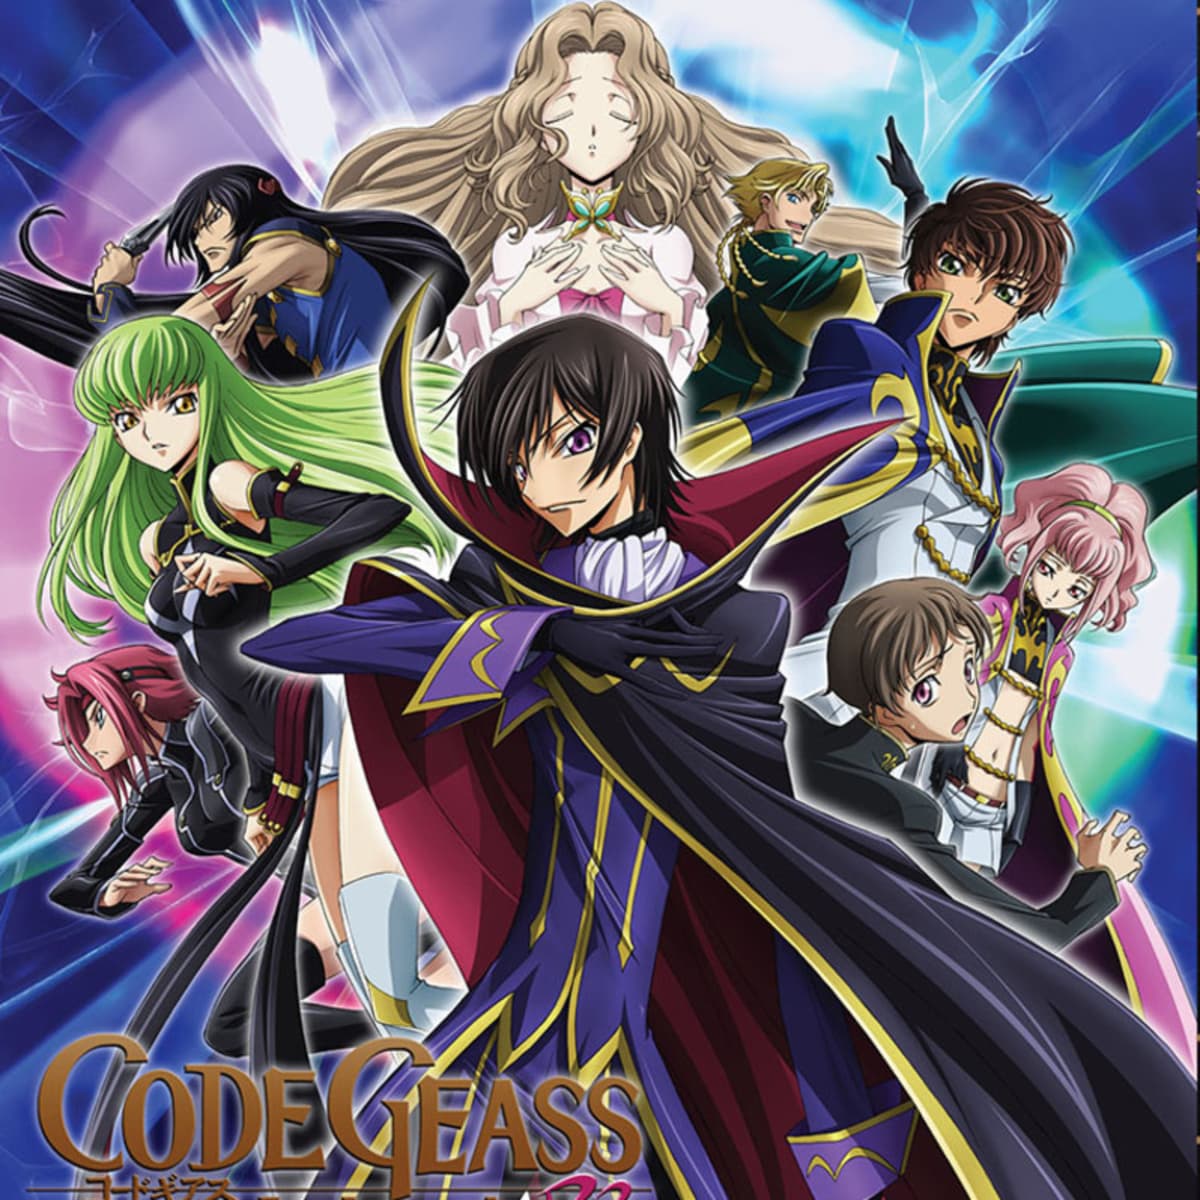 The Alternate Continuity of Code Geass Is Ruinous For Lelouch's Character